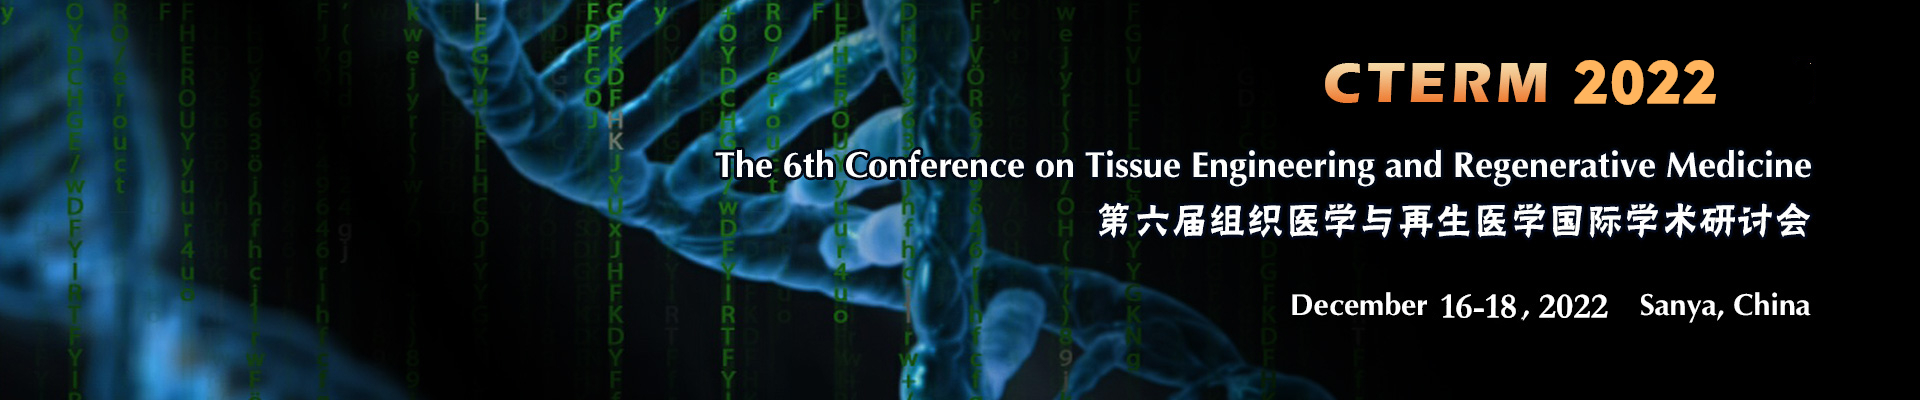 The 6th Int'l Conference on Tissue Engineering and Regenerative Medicine (CTERM 2022)